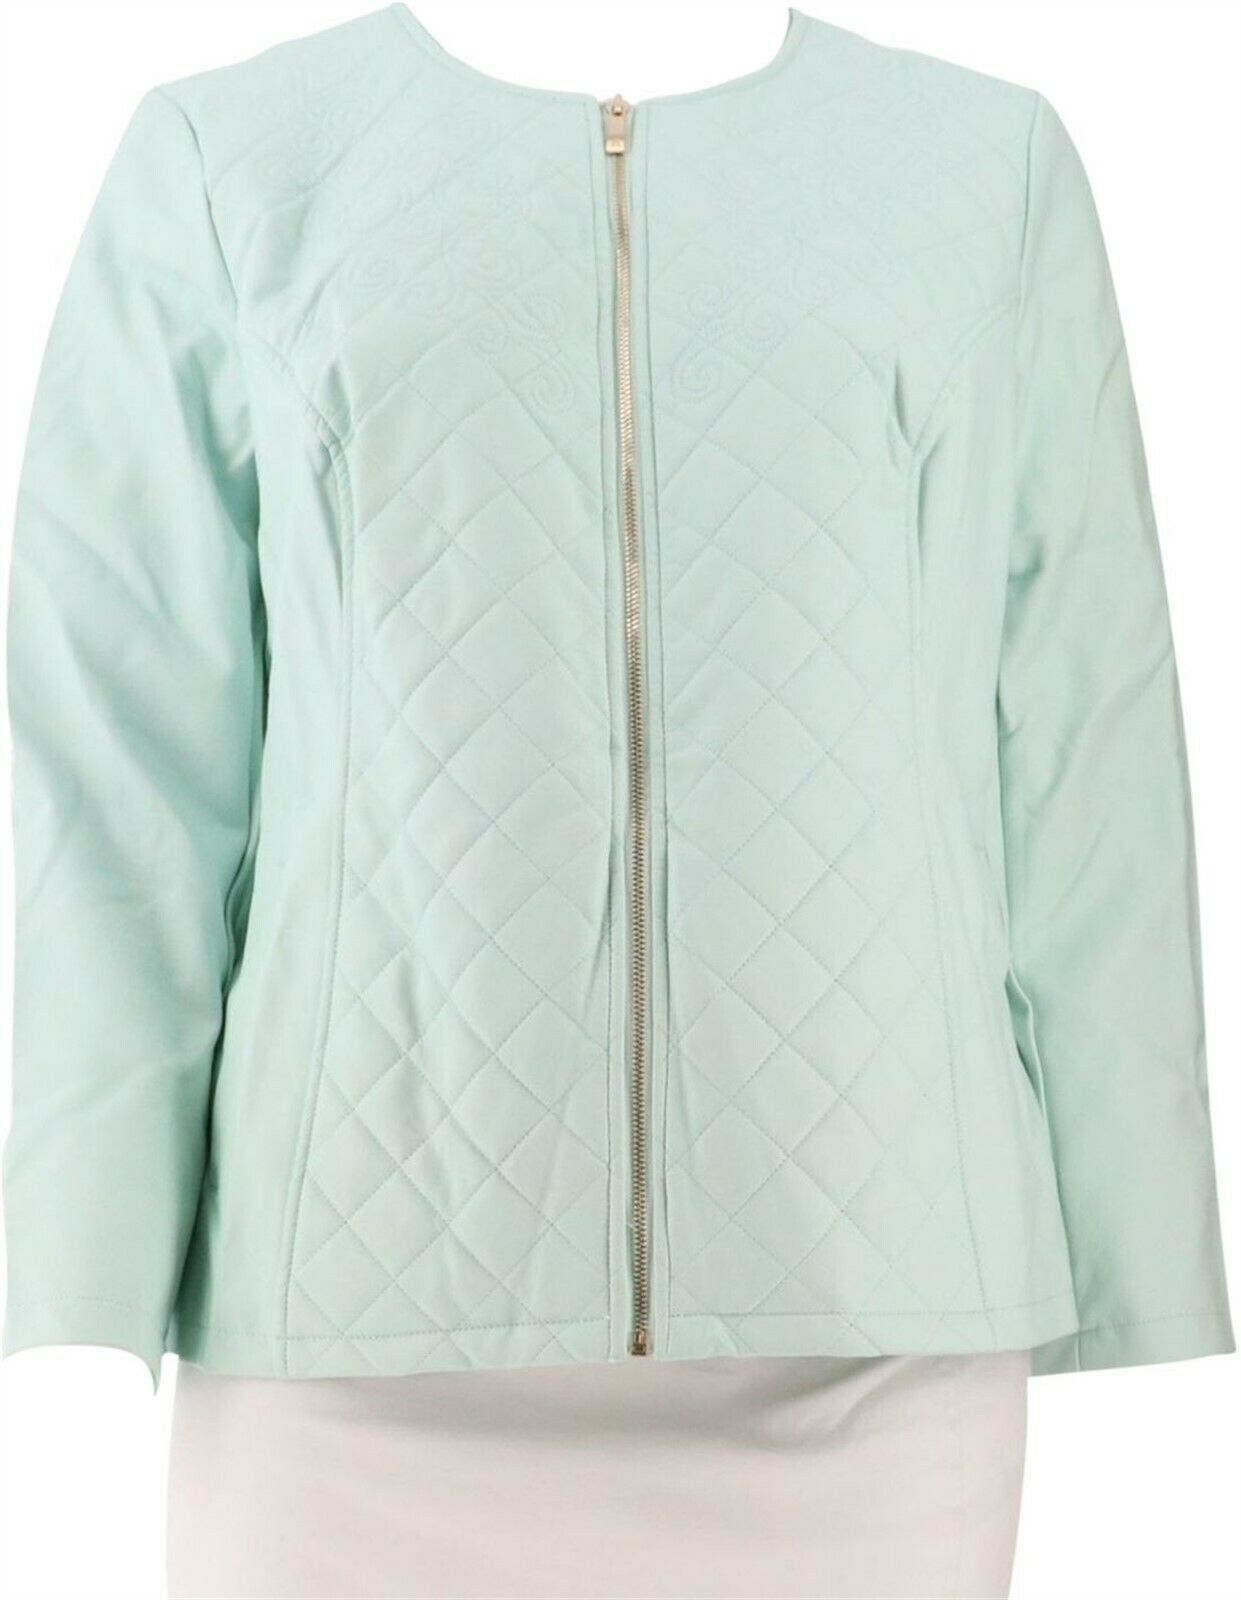 Dennis Basso Faux Leather Quilted Jacket Embroidery Pale Mint S NEW A273744